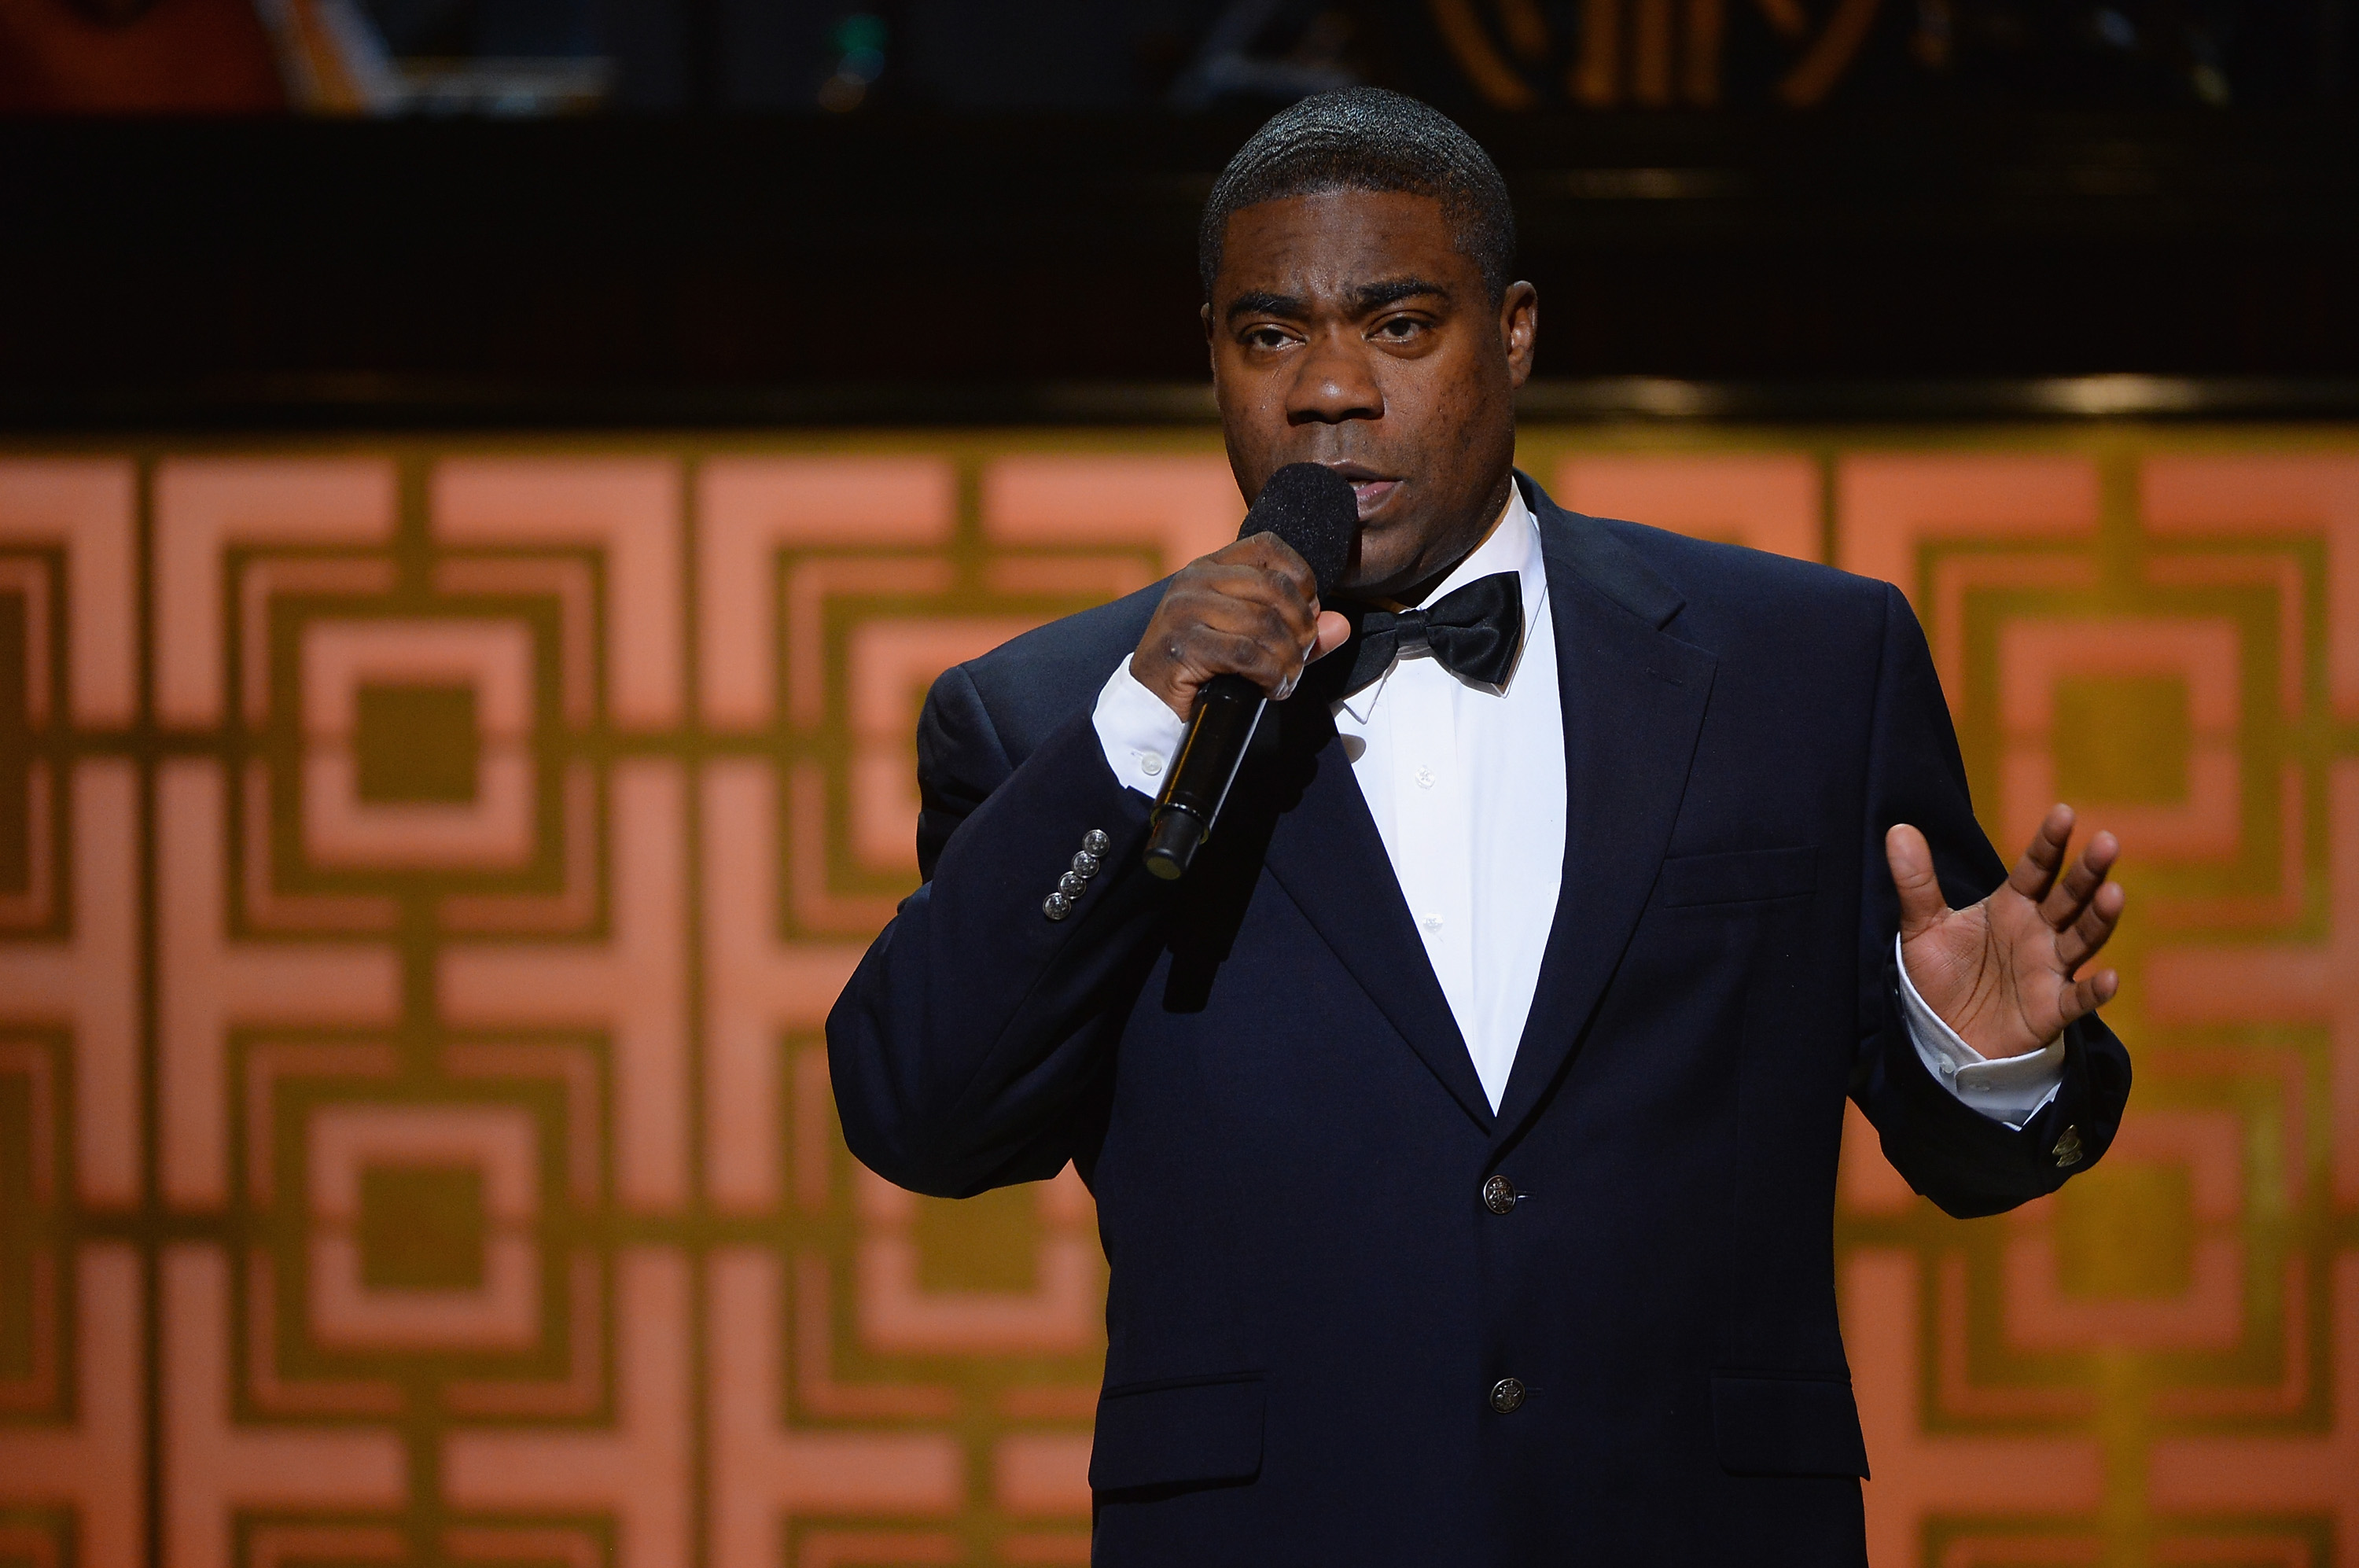 Tracy Morgan speaks onstage at Spike TV's "Don Rickles: One Night Only" on May 6, 2014 in New York City. (Theo Wargo—Getty Images for Spike TV)